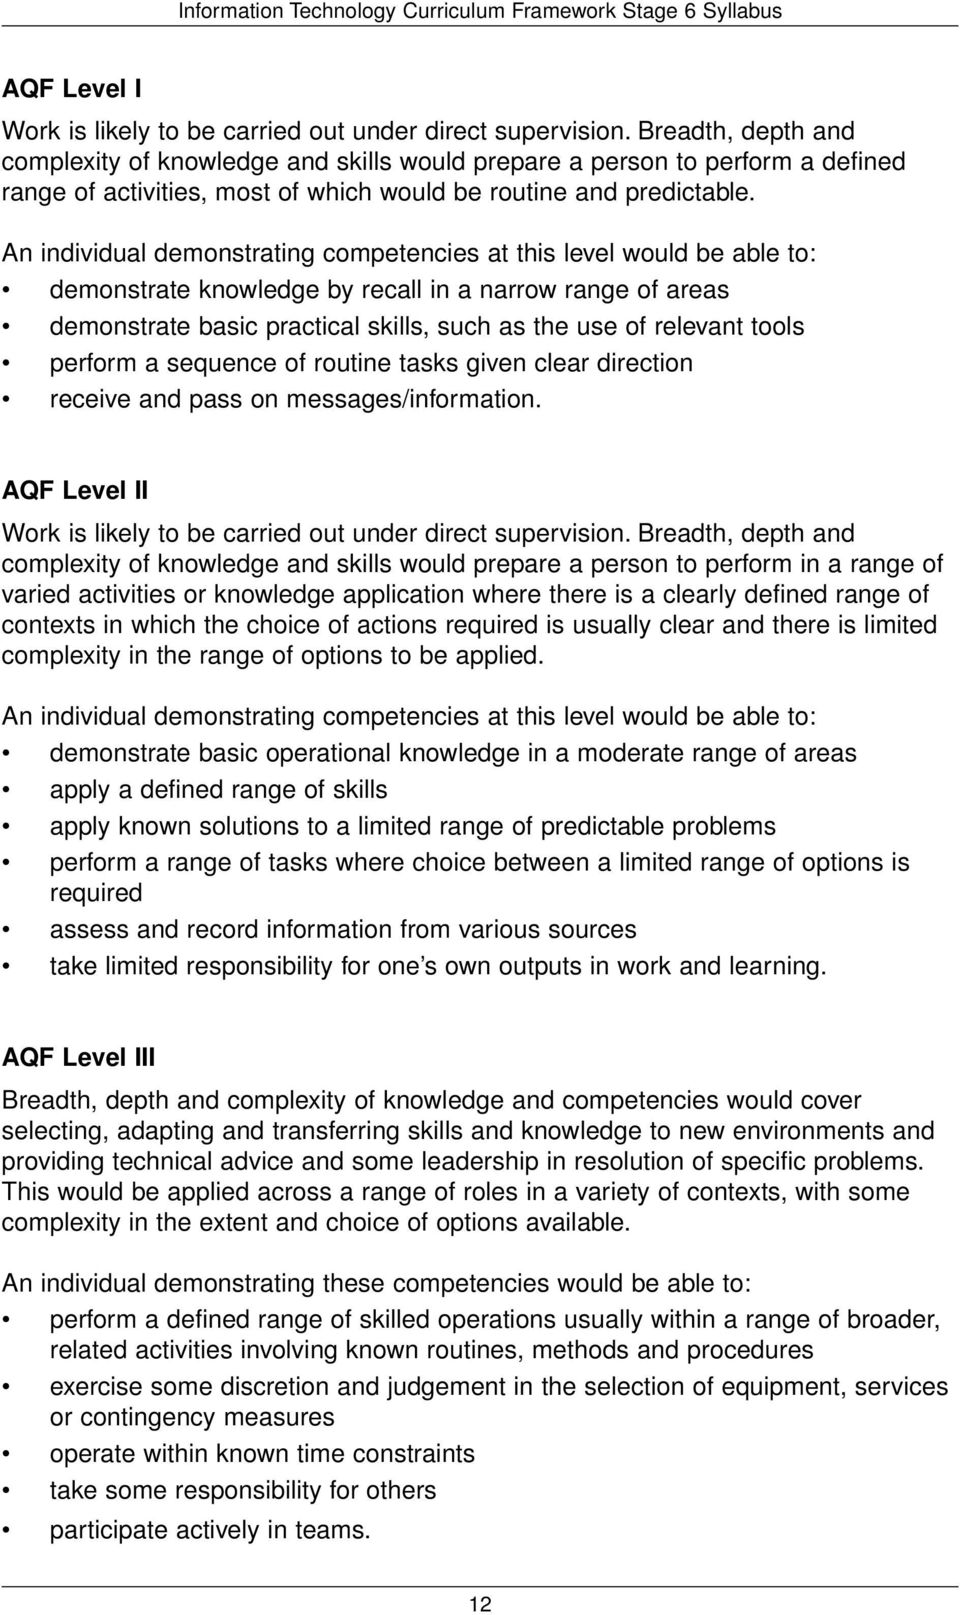 An individual demonstrating competencies at this level would be able to: demonstrate knowledge by recall in a narrow range of areas demonstrate basic practical skills, such as the use of relevant